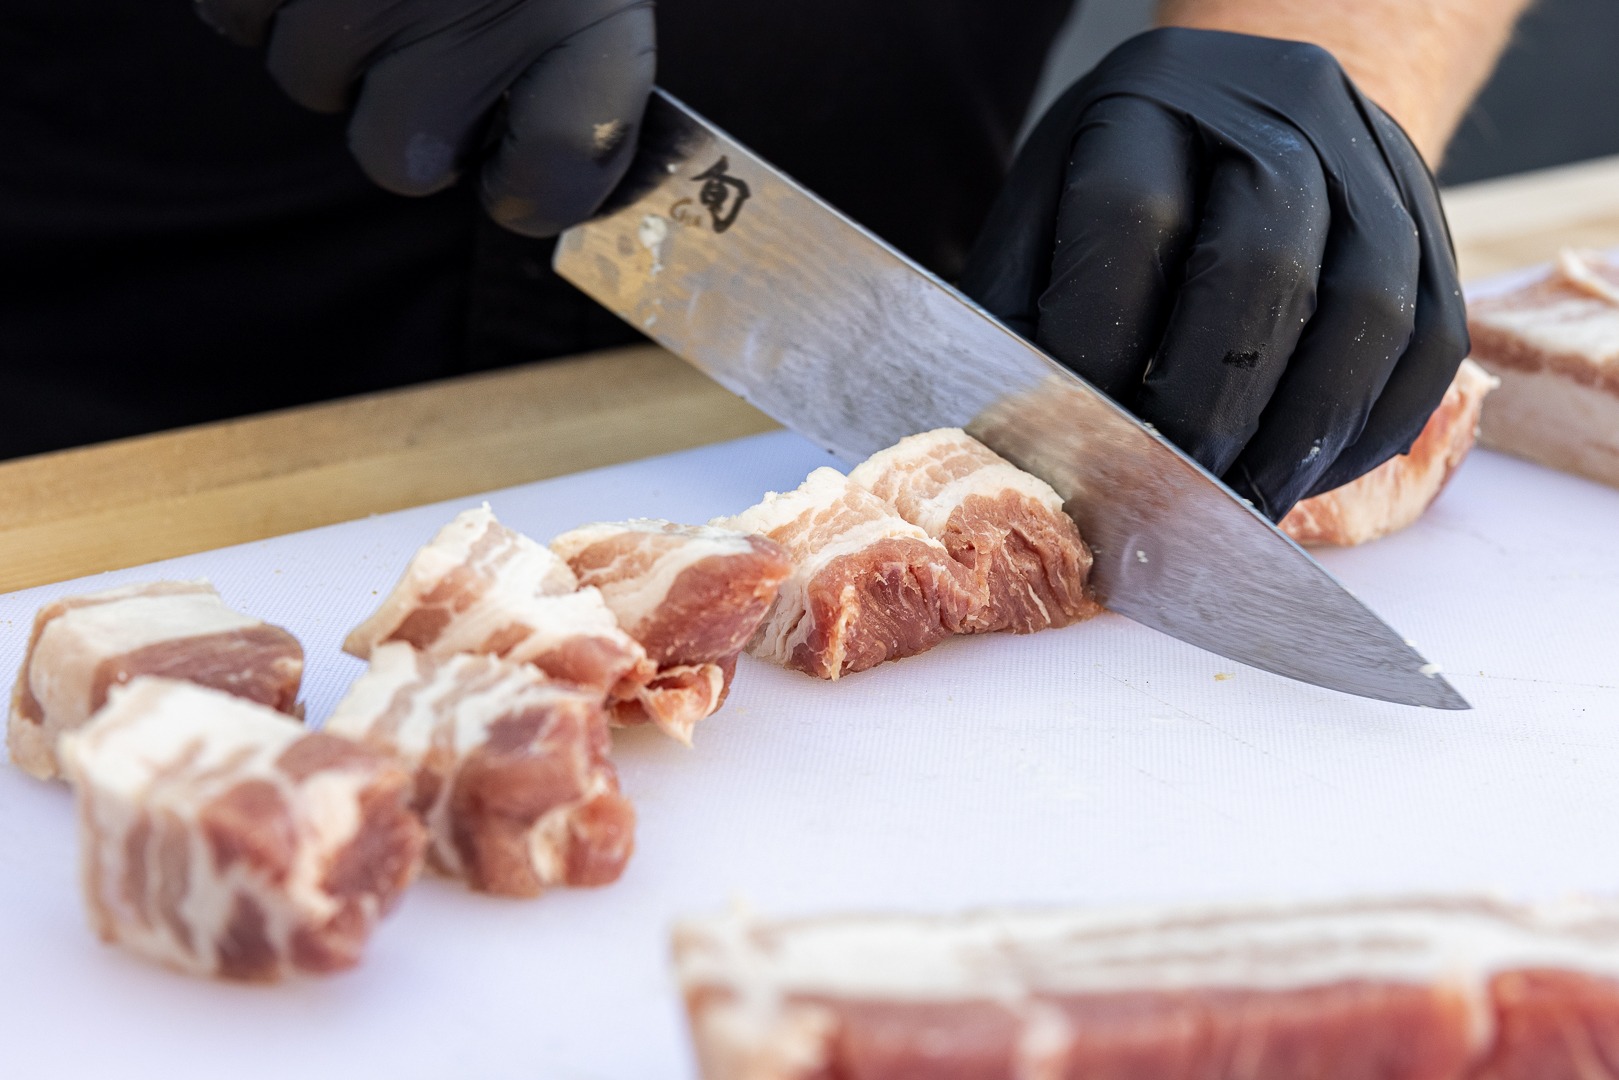 Cutting the pork belly into cubes